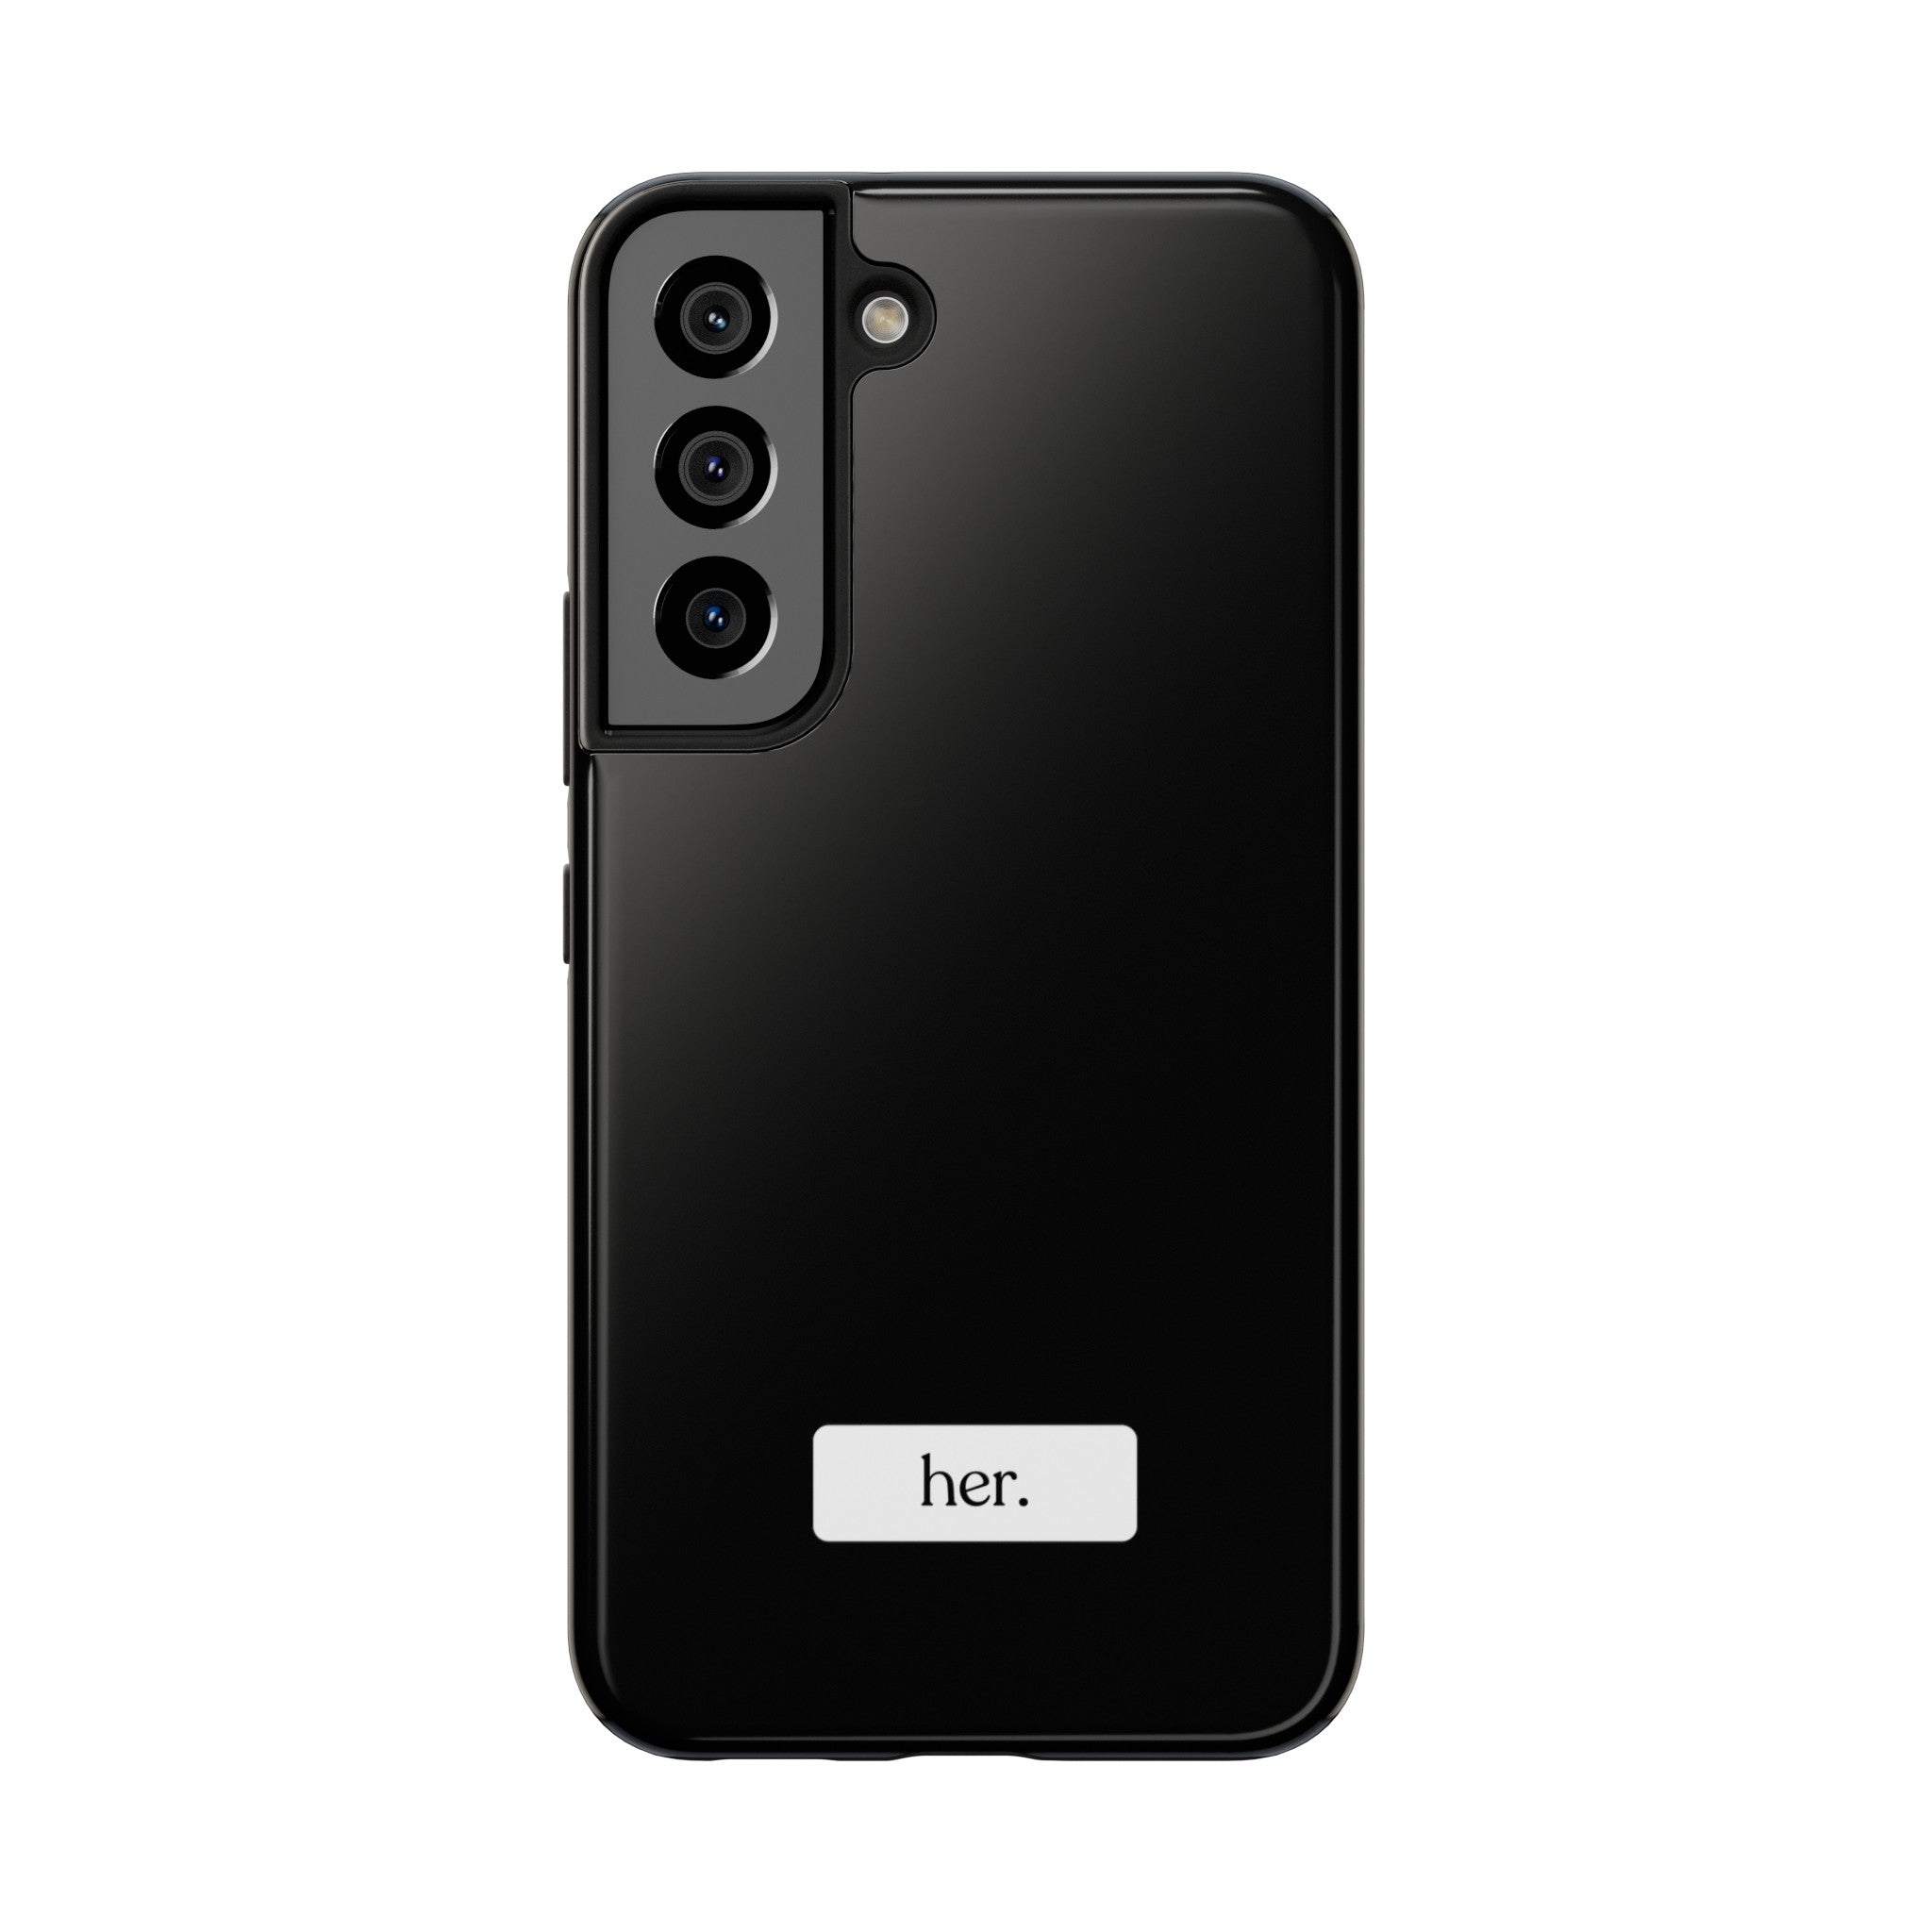 “her” Tough Phone Cases